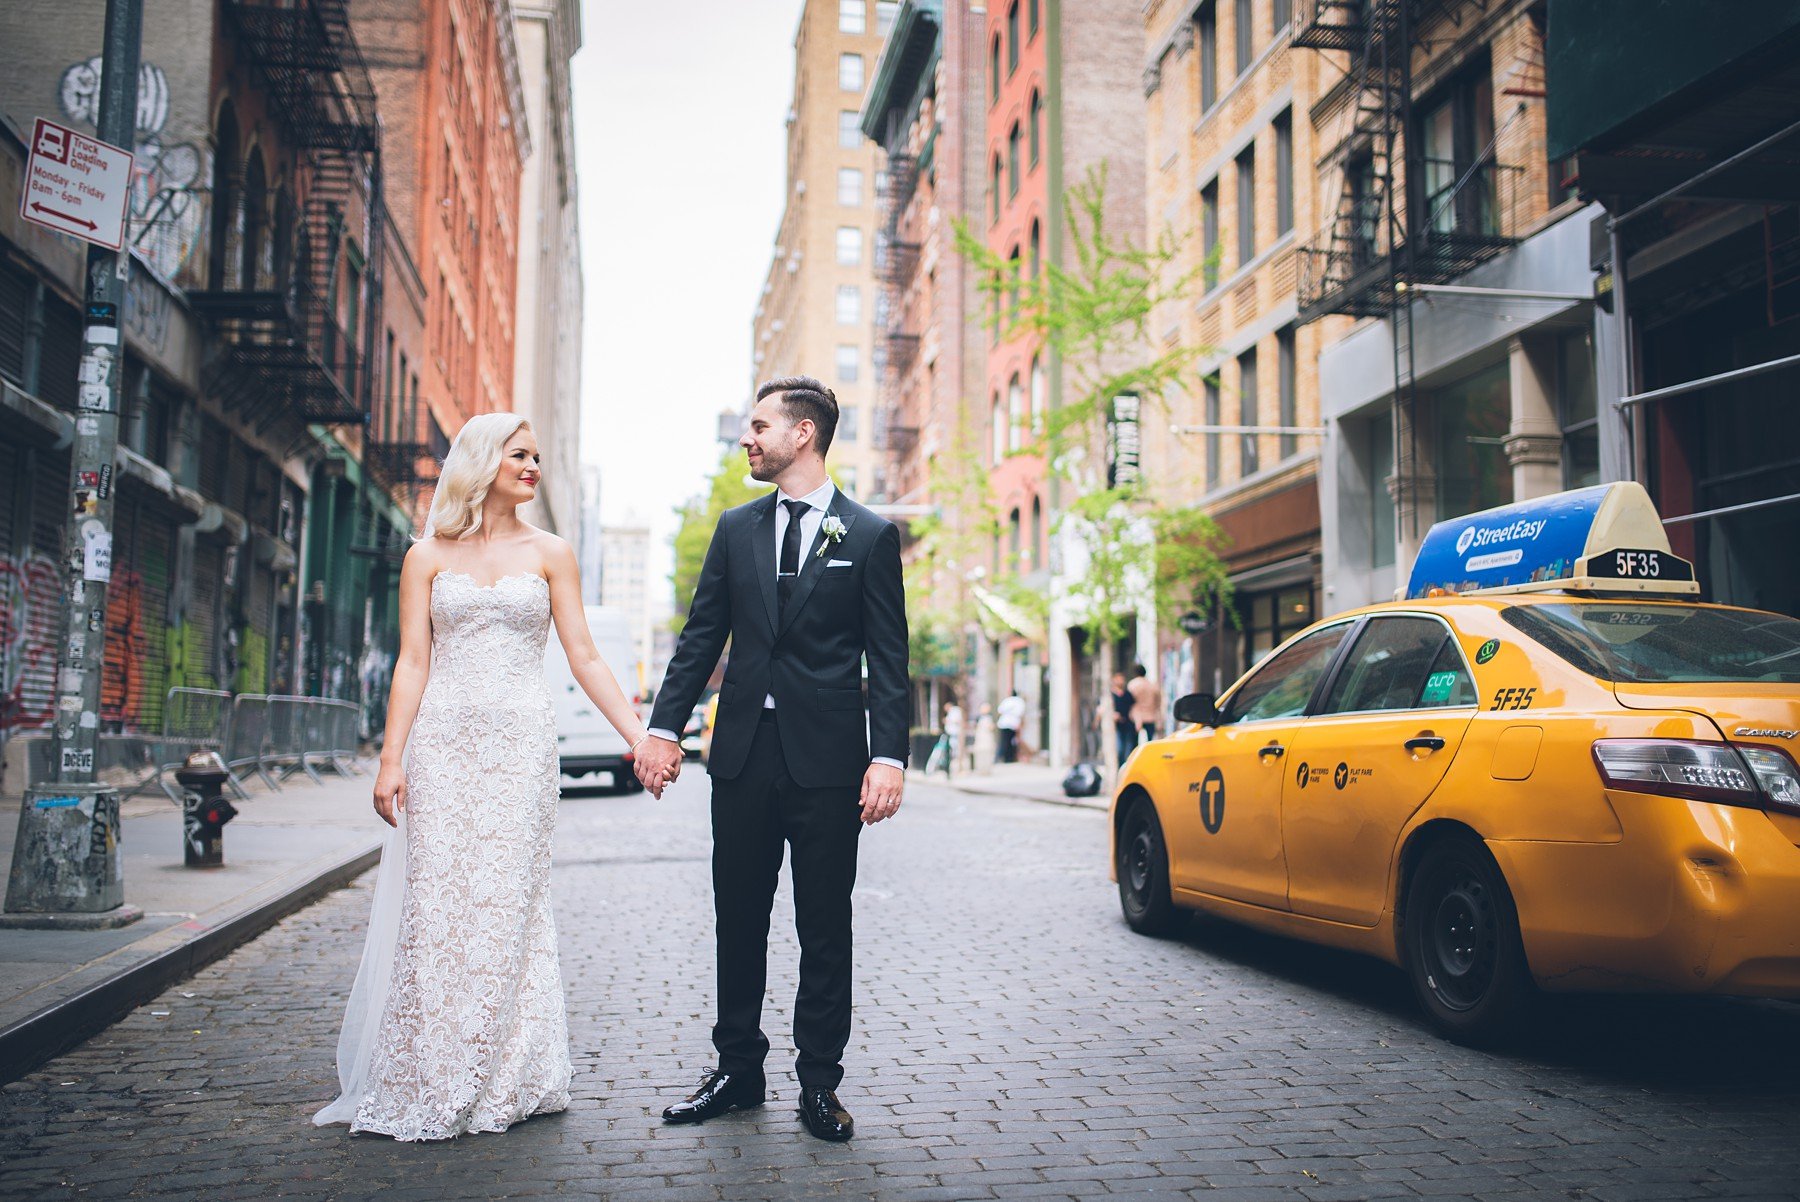 How to get married in New York